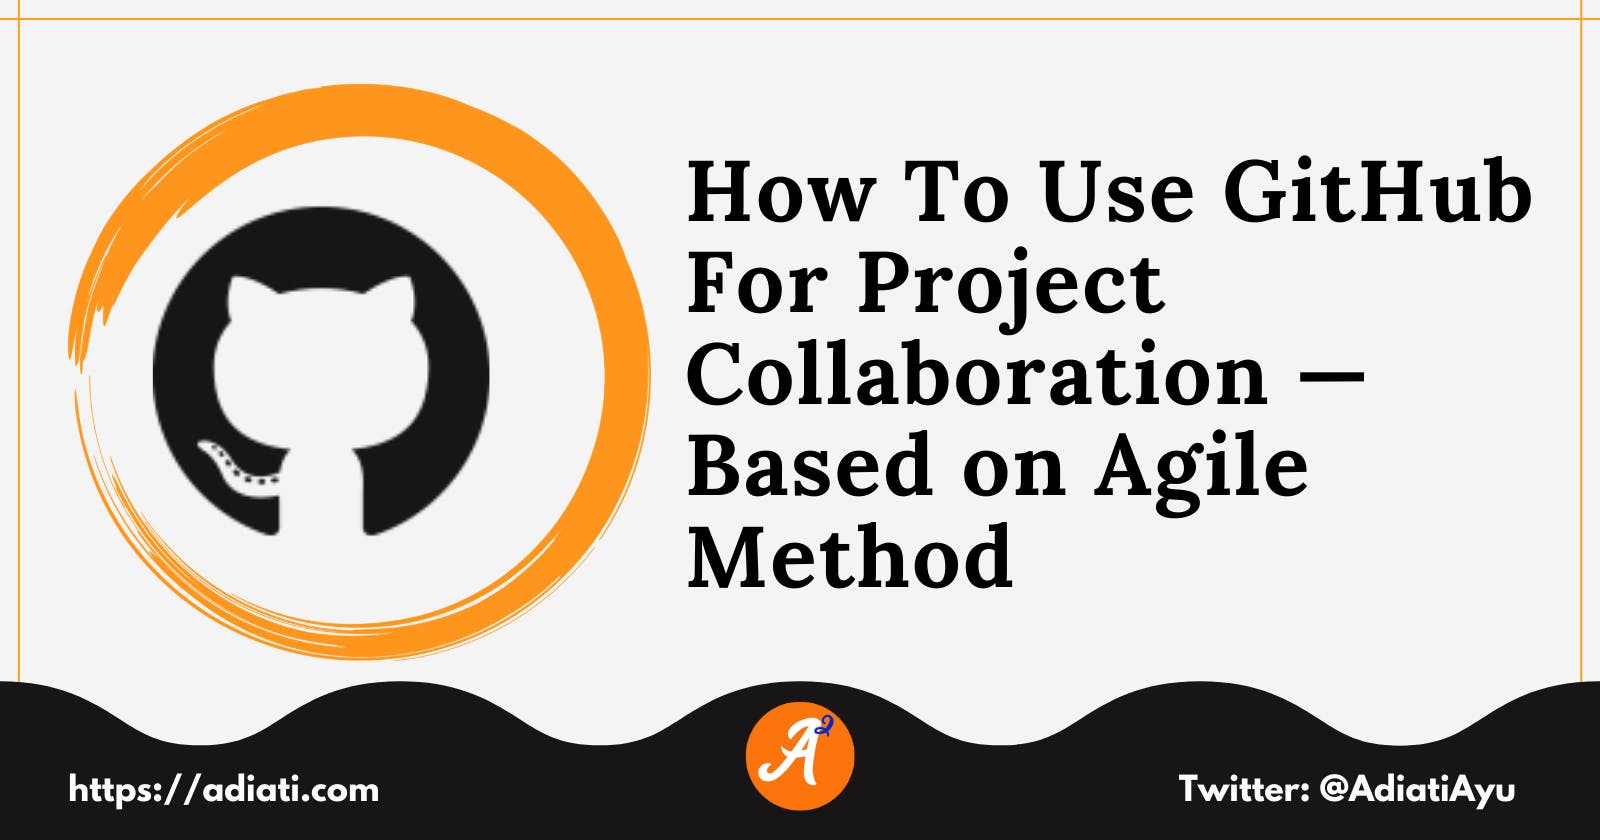 How To Use GitHub For Project Collaboration — Based on Agile Method